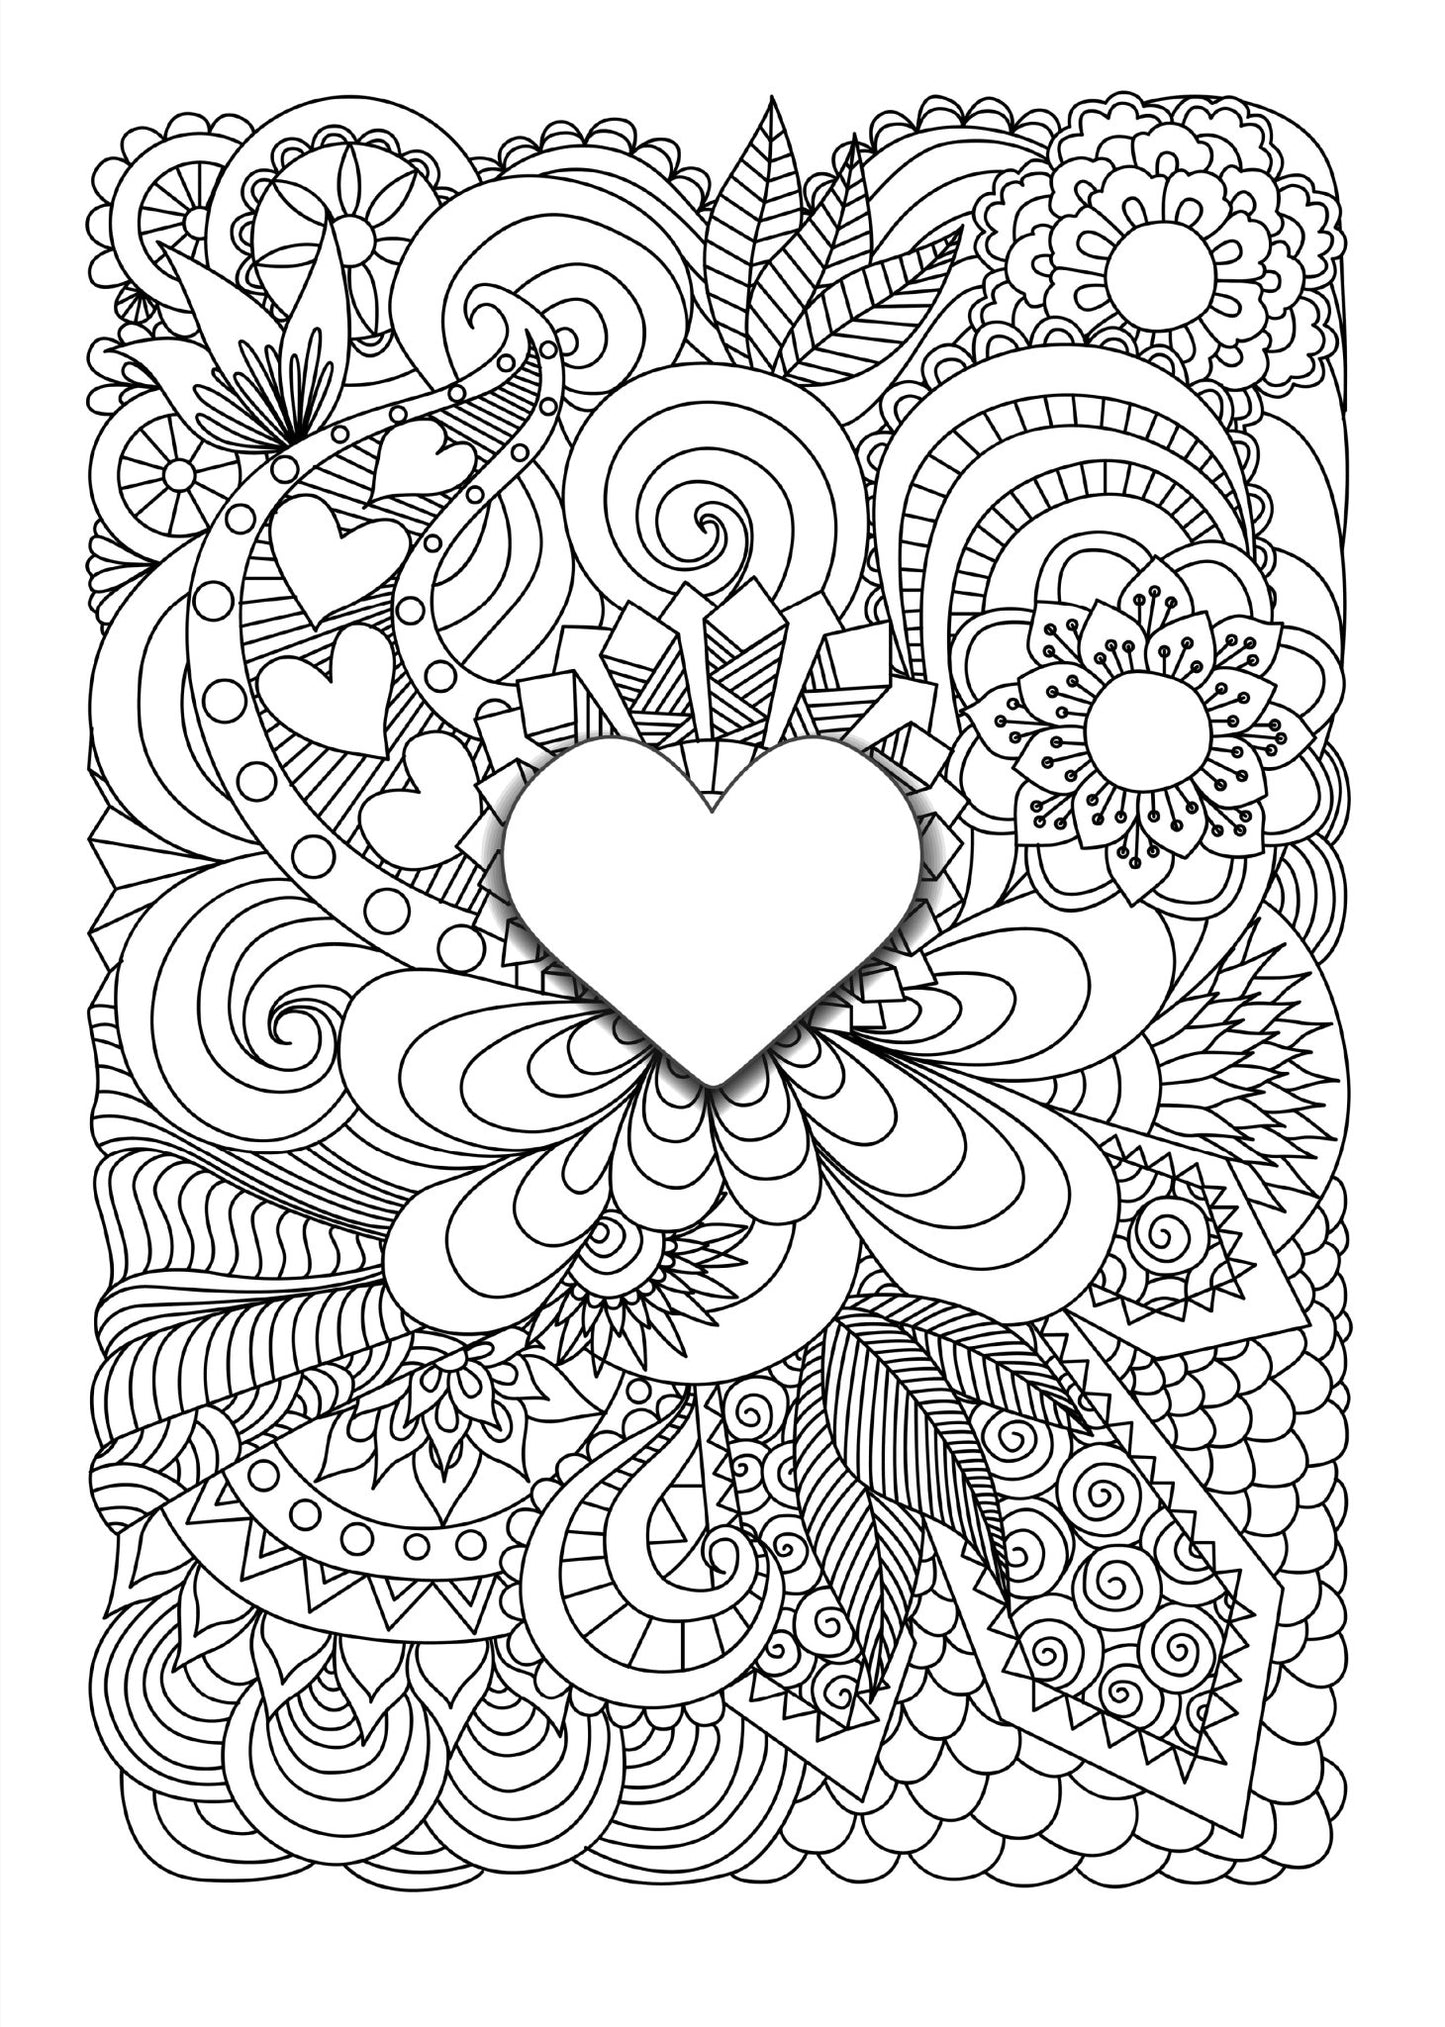 Valentine Coloring Book for Adults (Printbook) - Monsoon Publishing USA